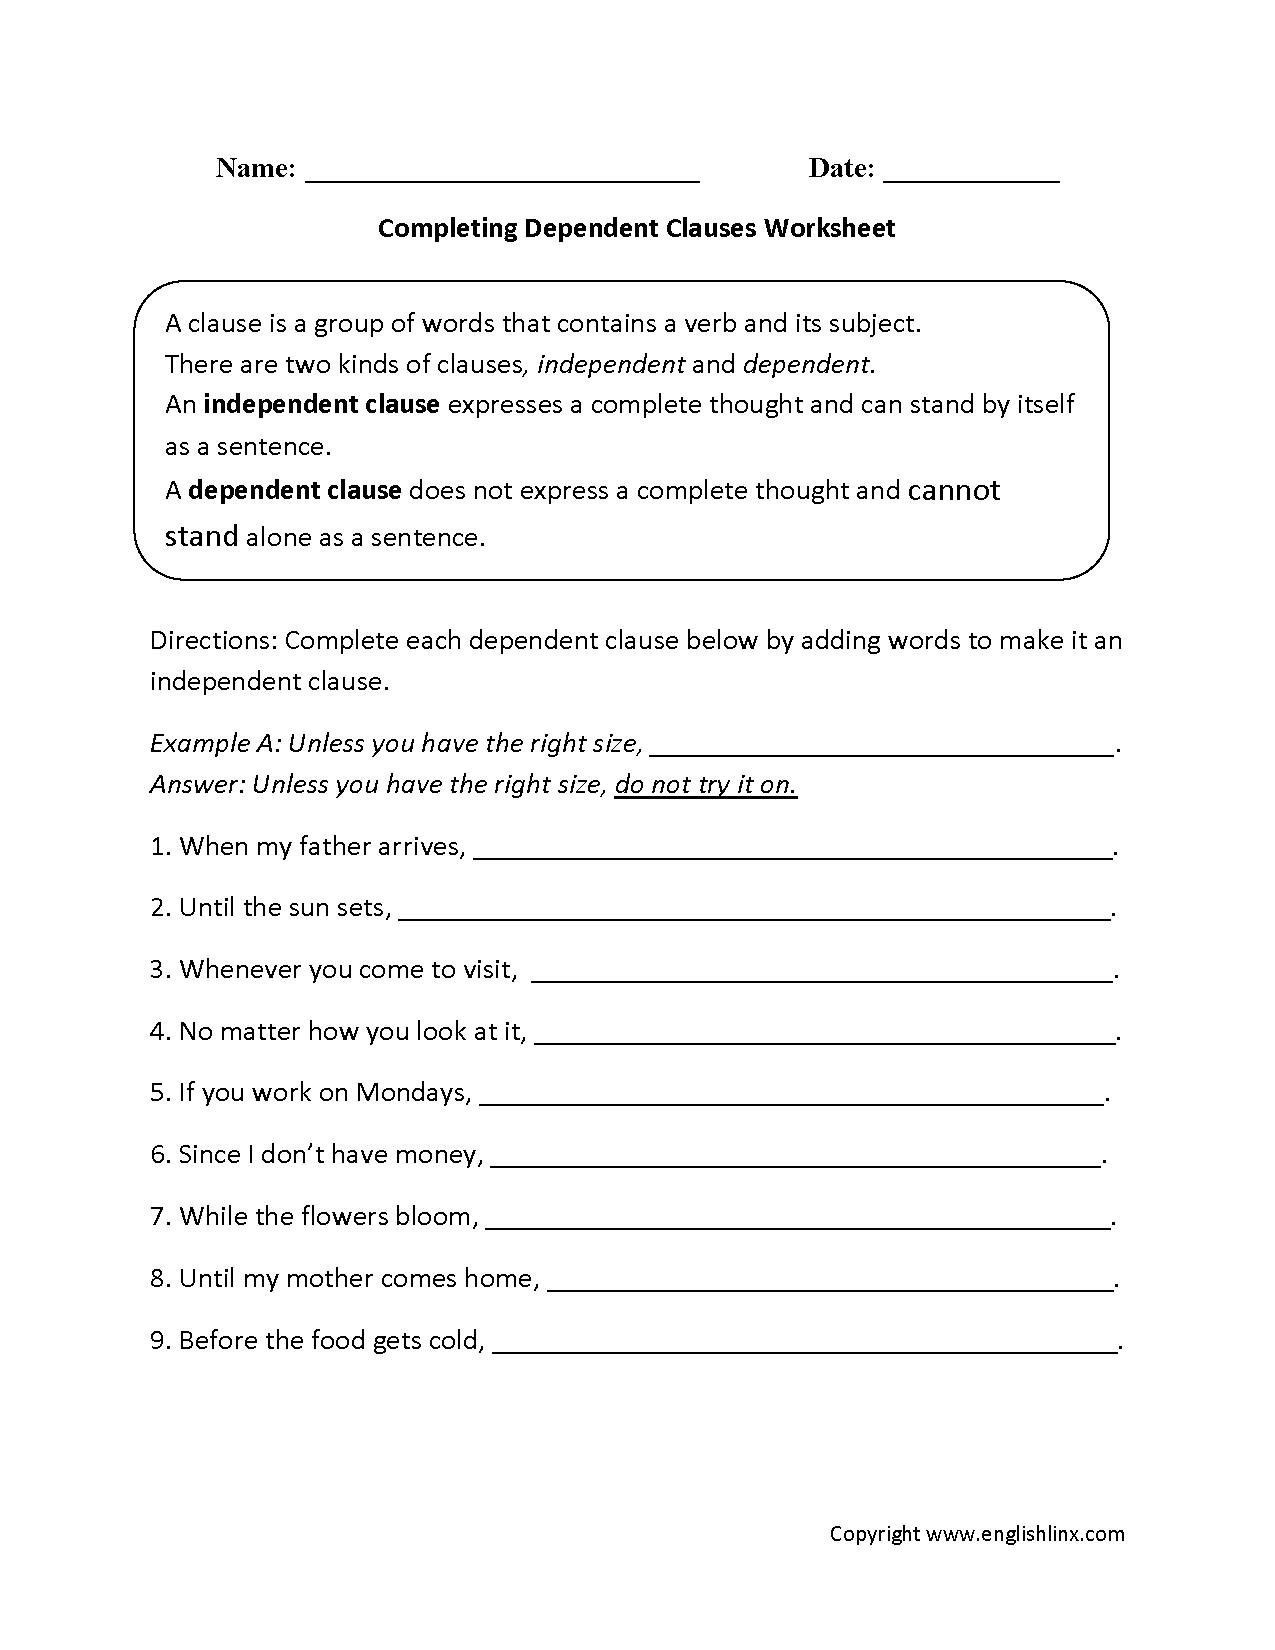 Completing Dependent Clauses Worksheet